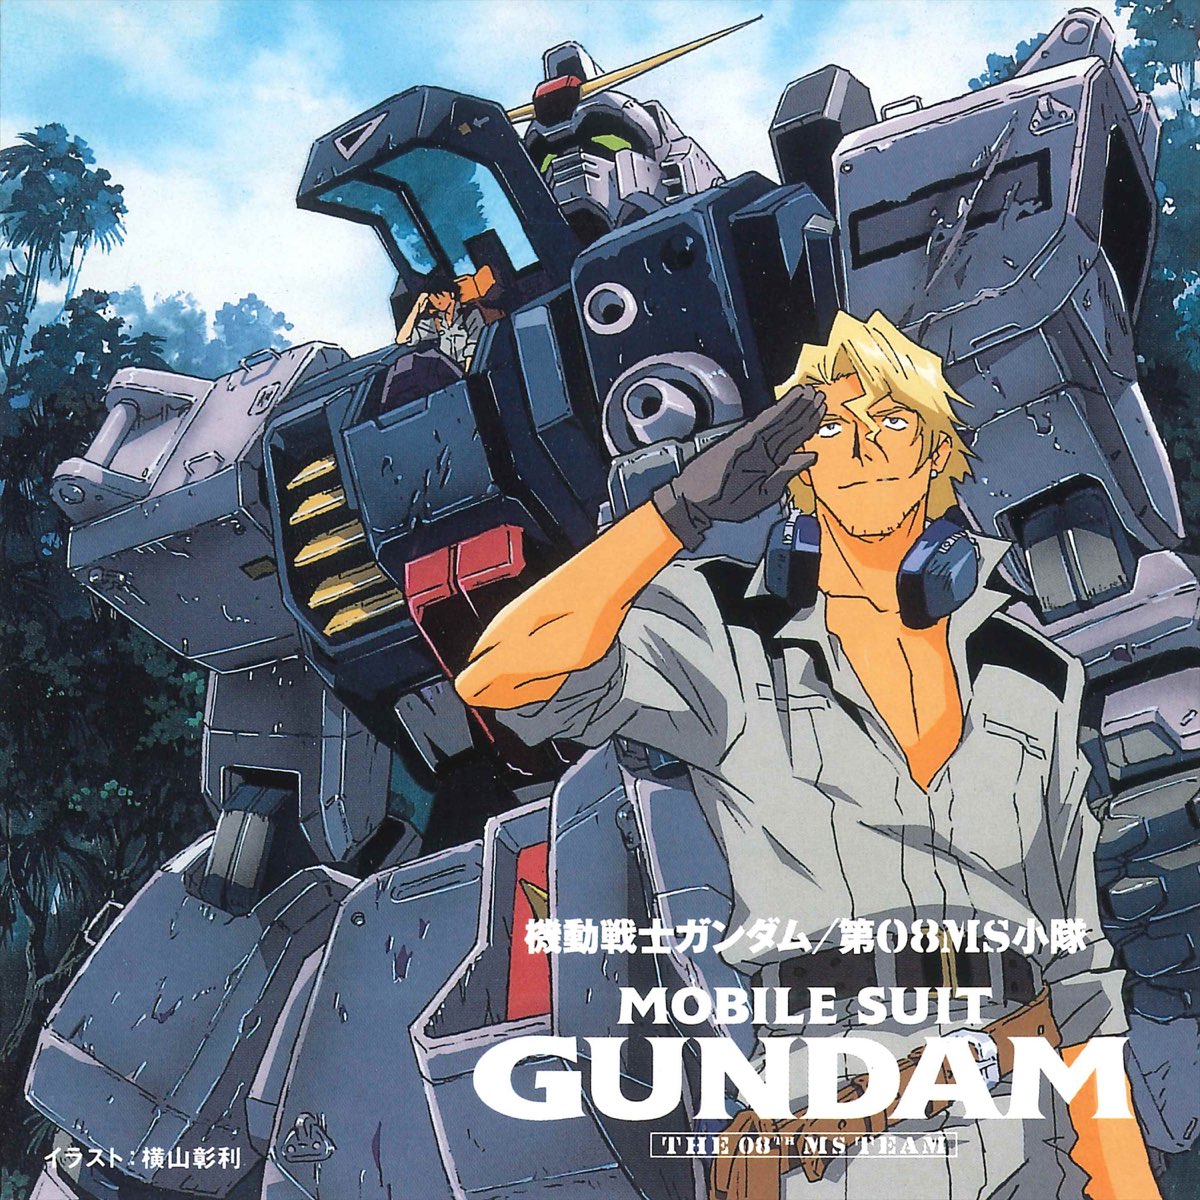 MOBILE SUIT GUNDAM THE 08th MS TEAM (Original Motion Picture Soundtrack 1)  - Album by Kohei Tanaka - Apple Music